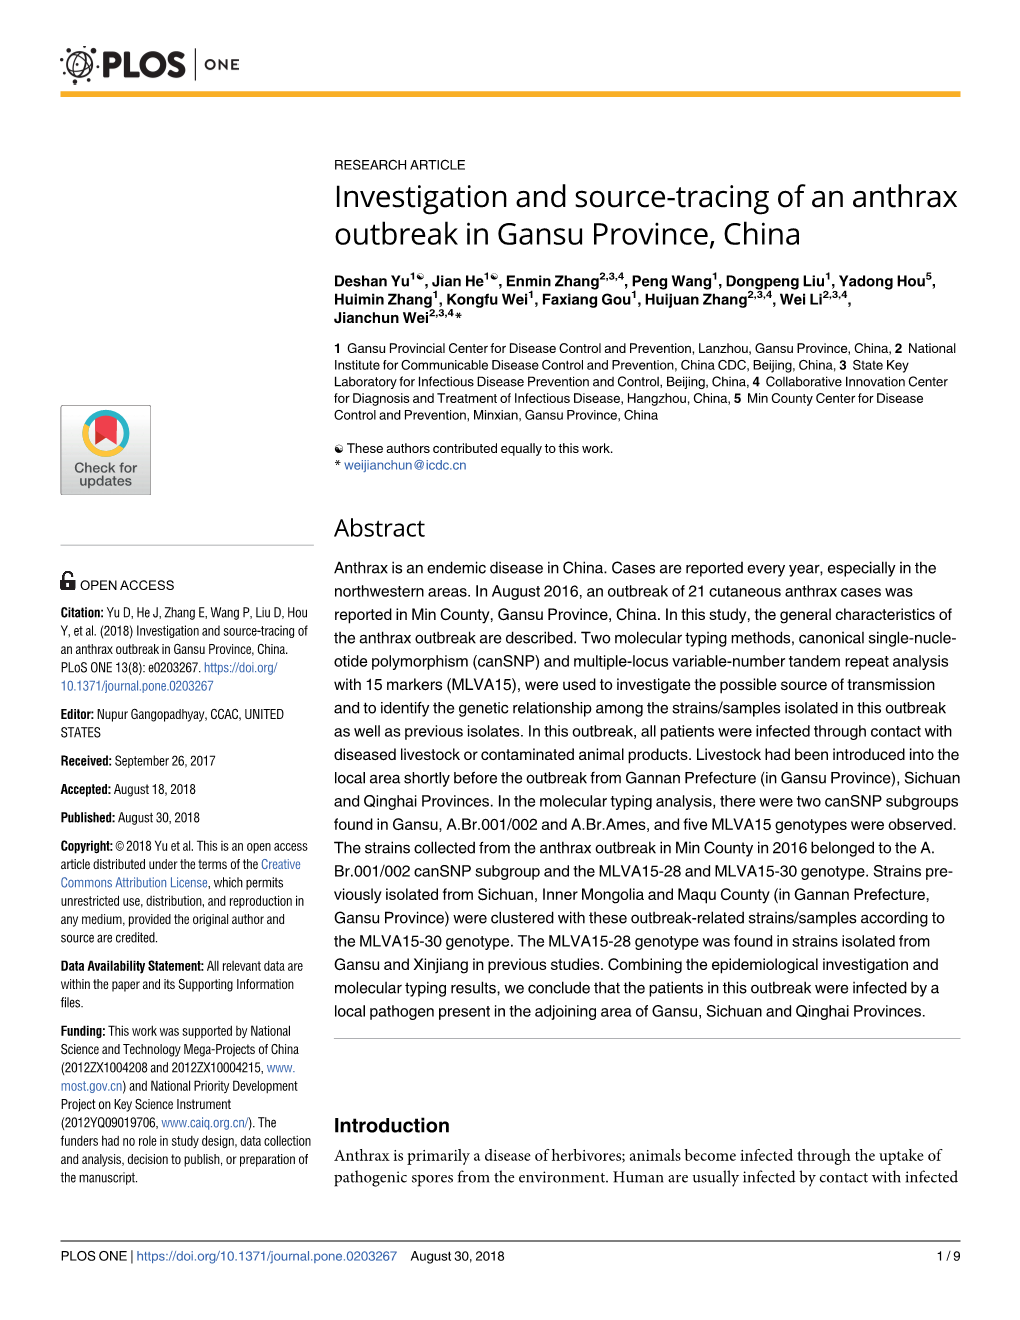 Investigation and Source-Tracing of an Anthrax Outbreak in Gansu Province, China